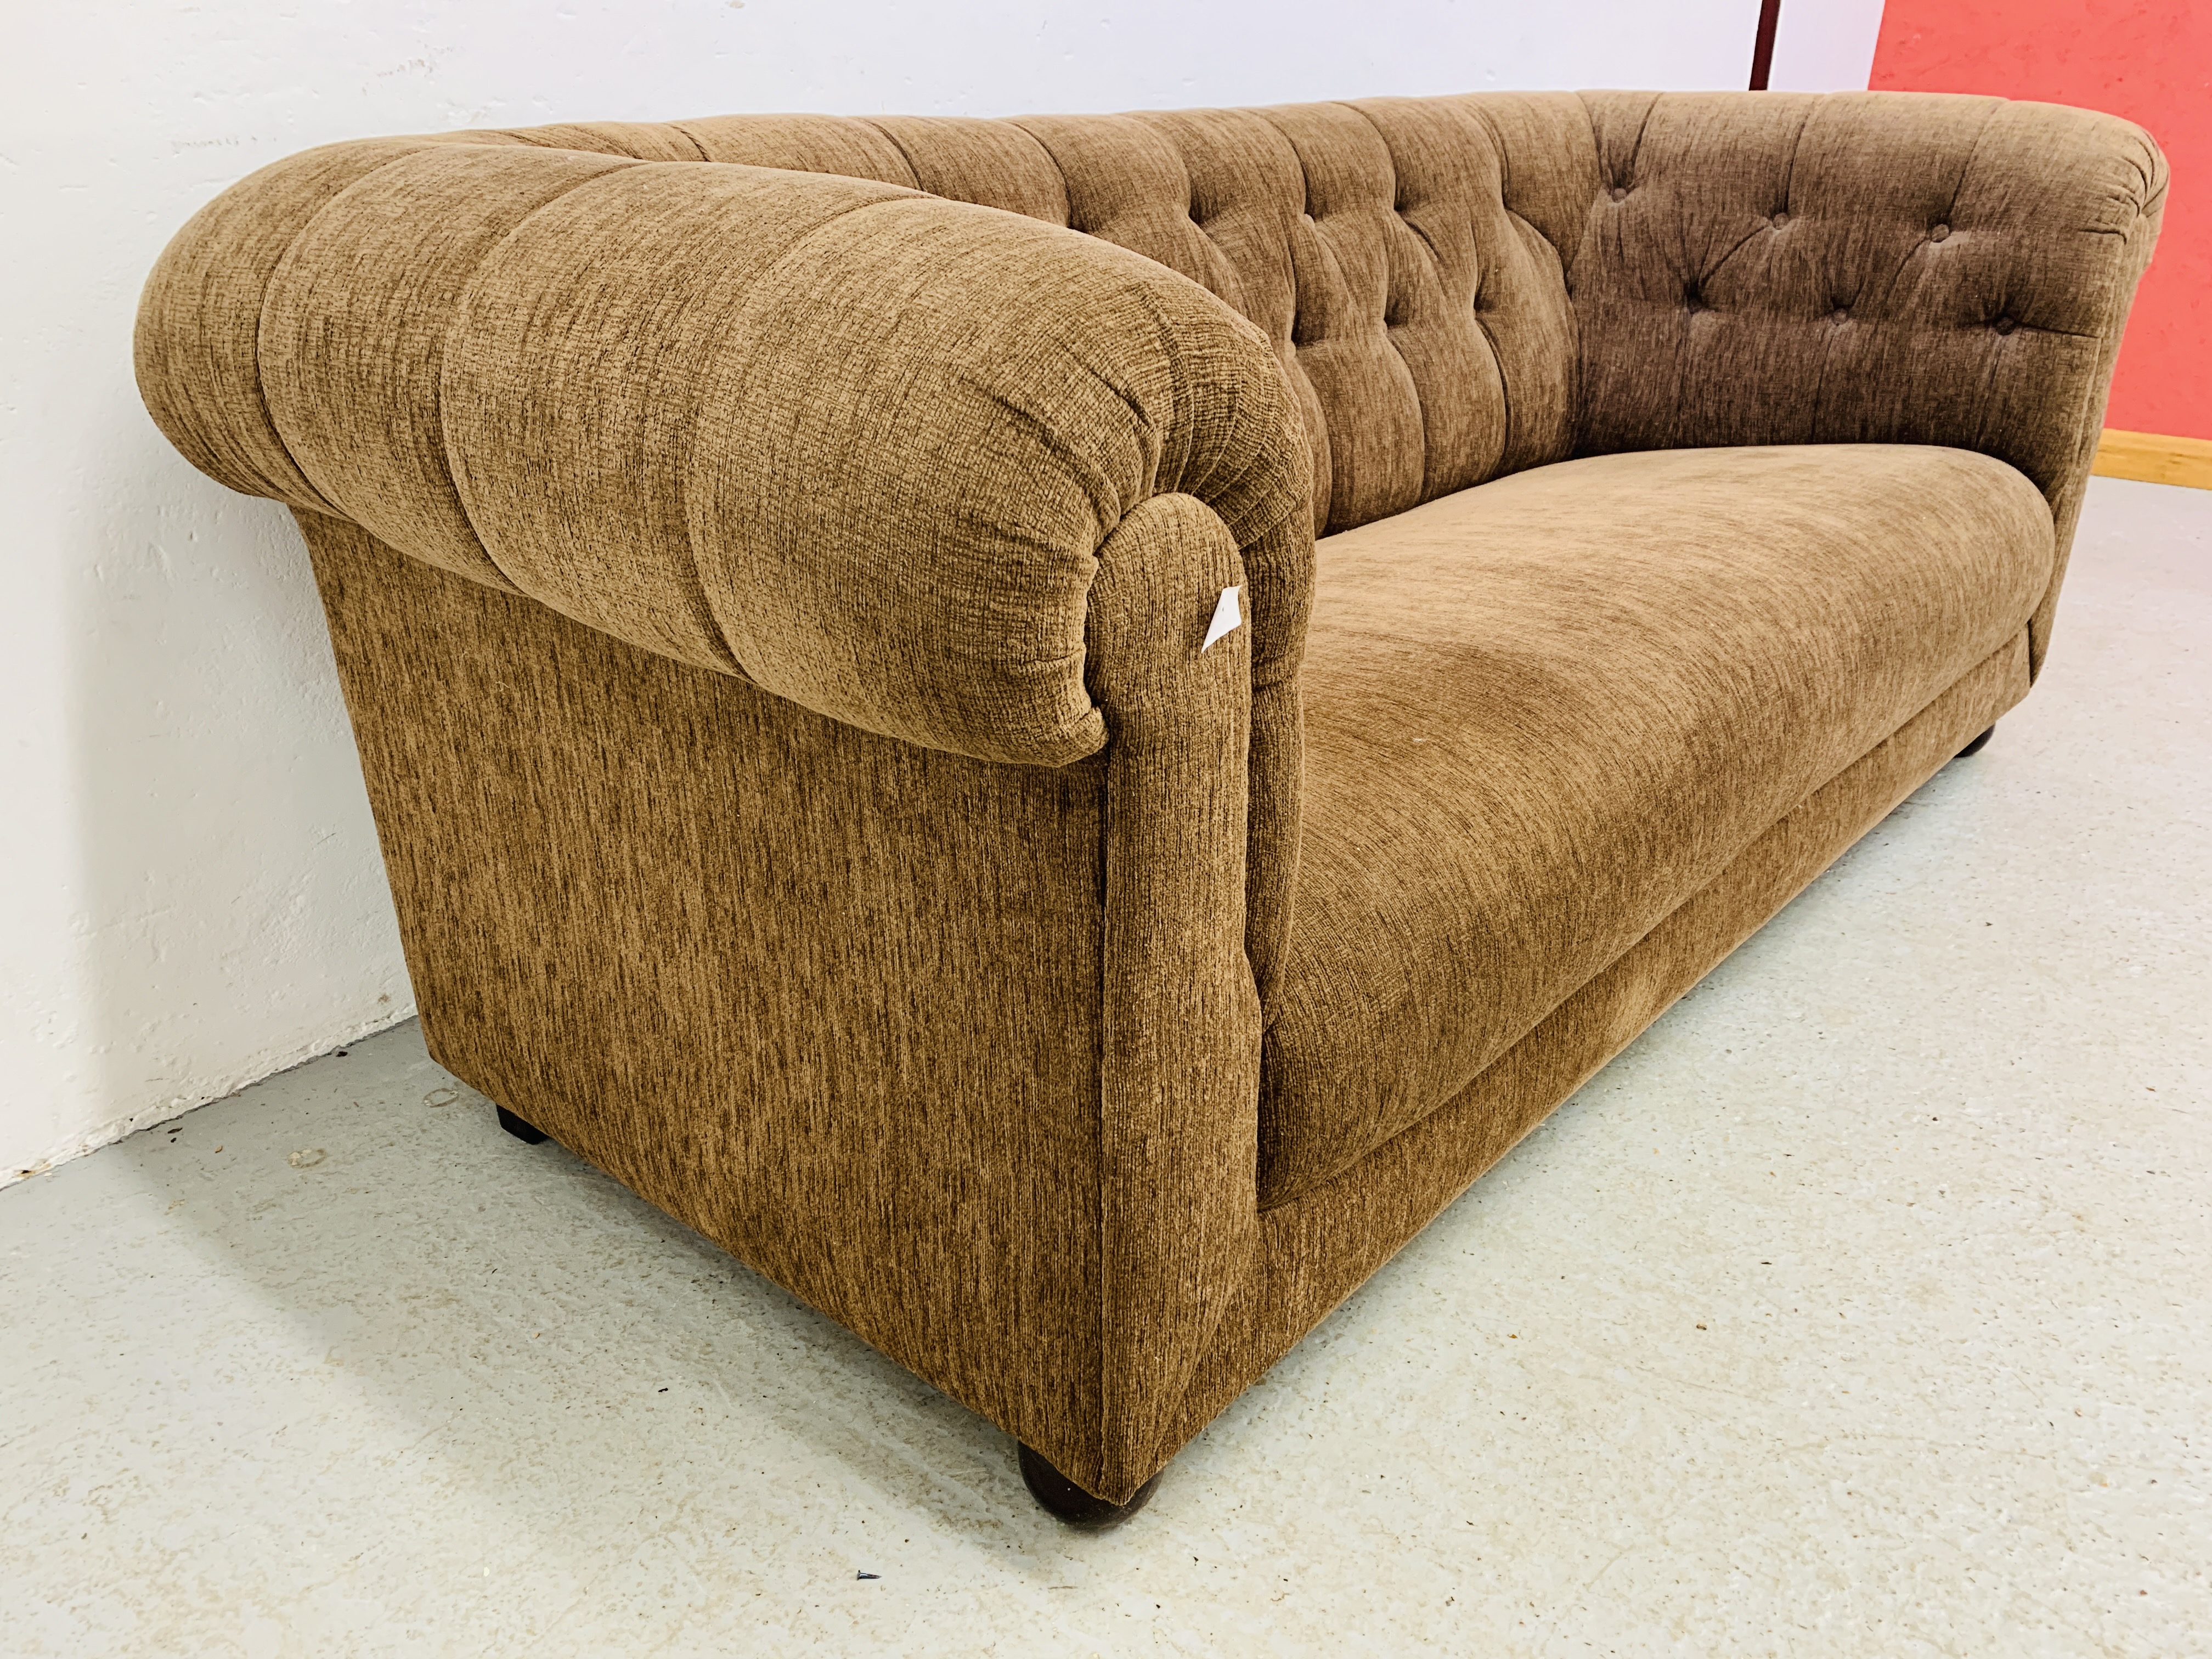 A MODERN BROWN CHESTERFIELD STYLE BUTTON BACK SOFA. L 195CM. D 92CM. H 75CM. - Image 7 of 8